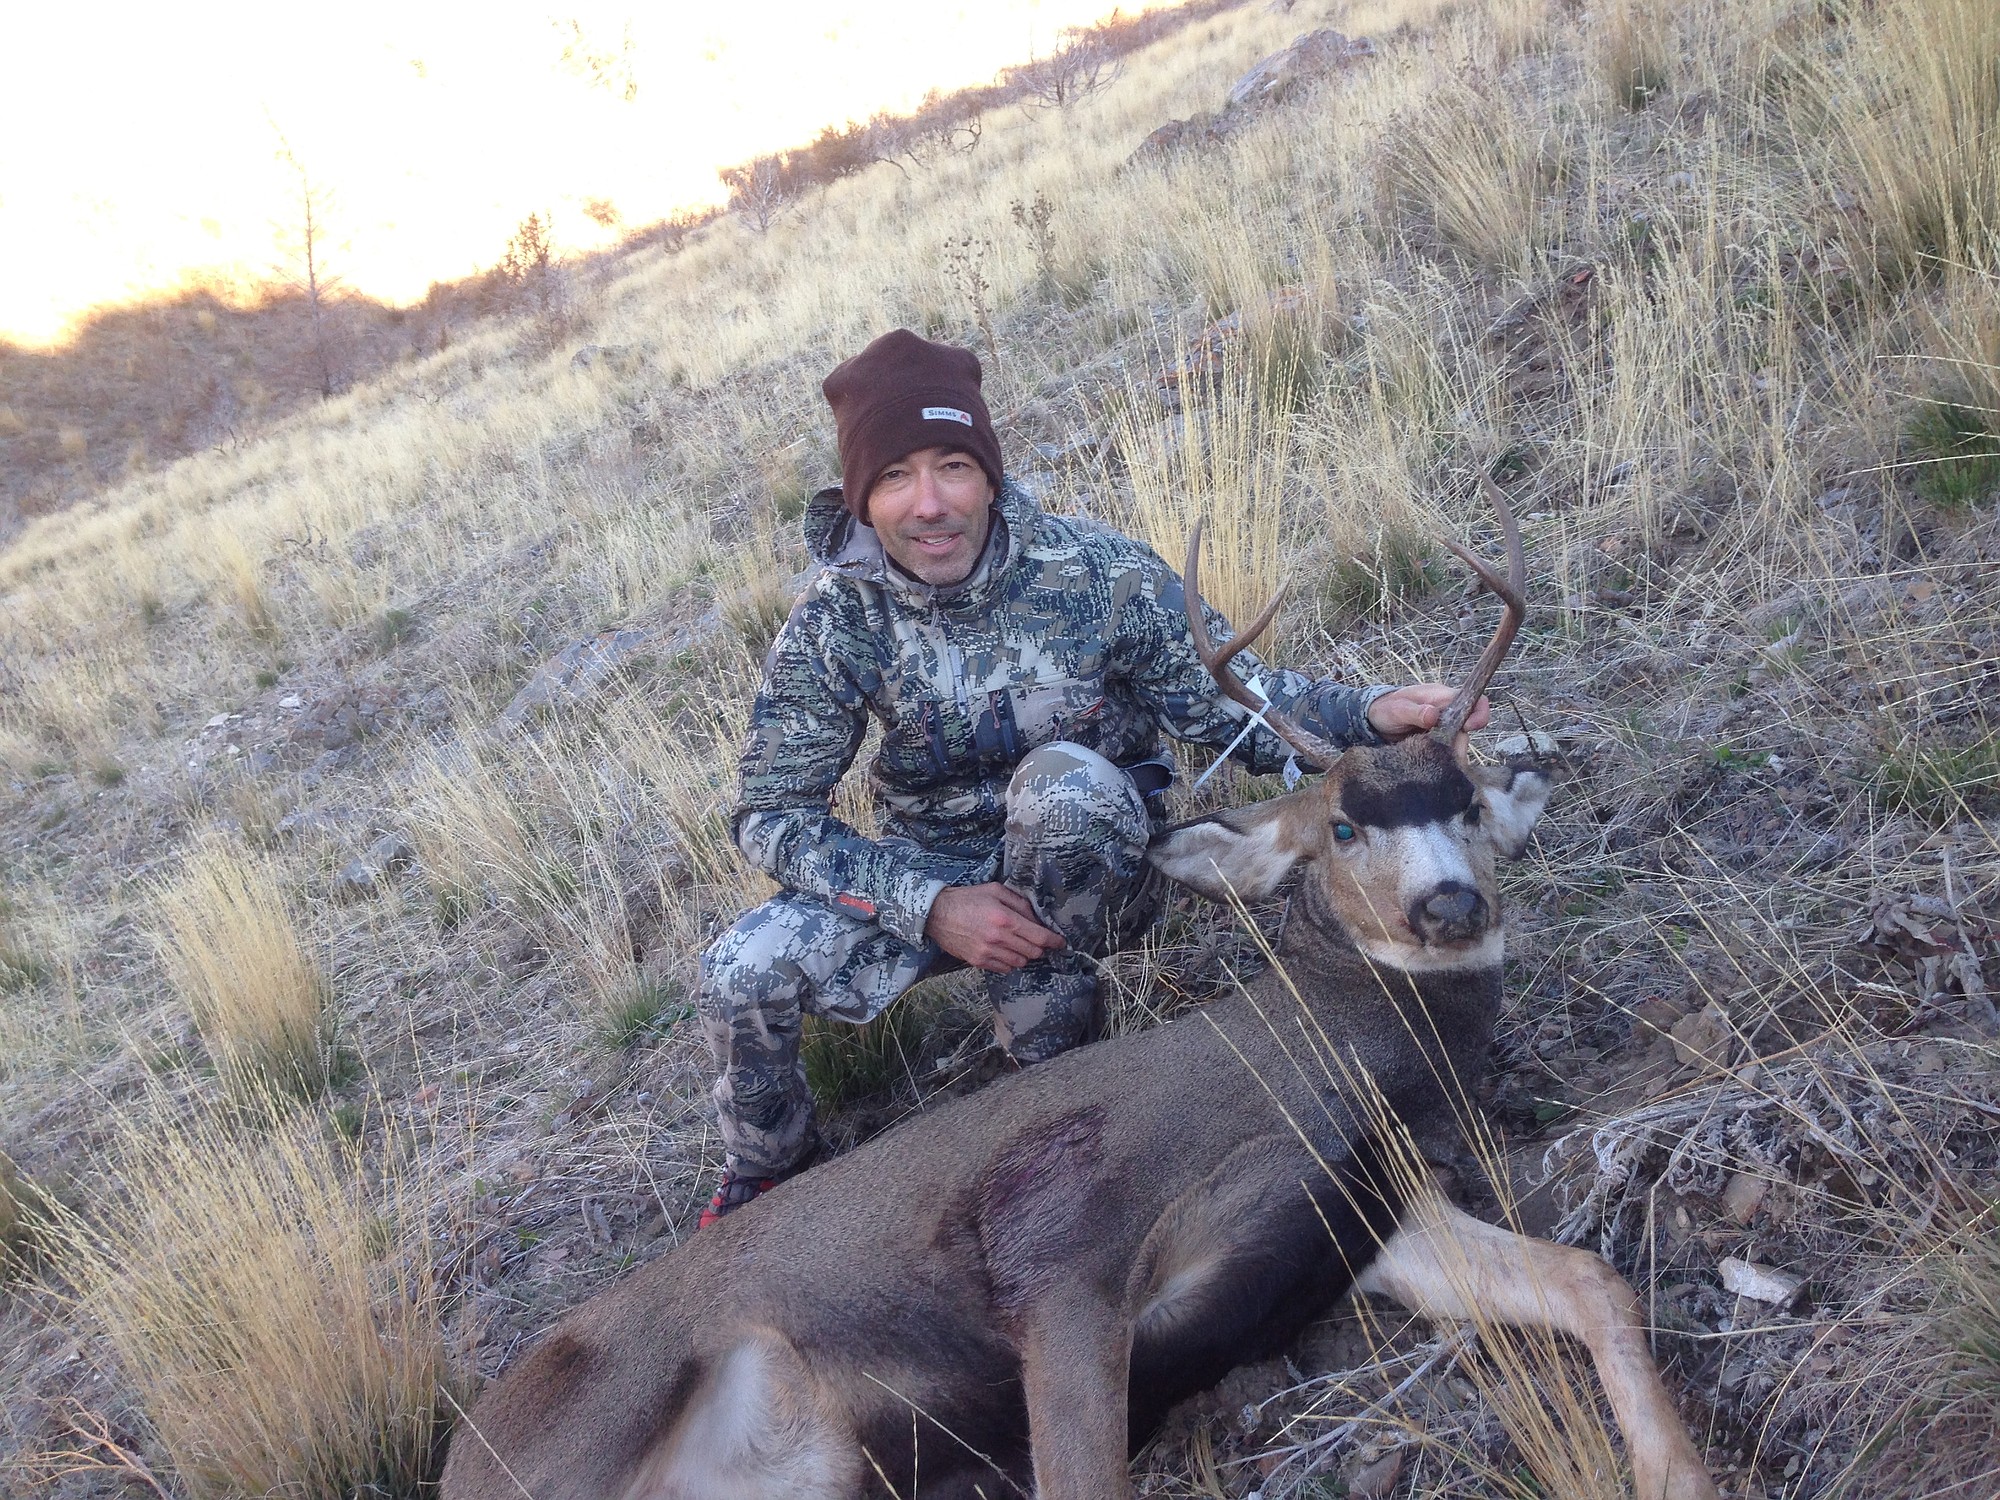 Brian Miesch, of Pocatello, Idaho, bagged a year-and-a-half-old buck this season after finishing the Wildavore program.